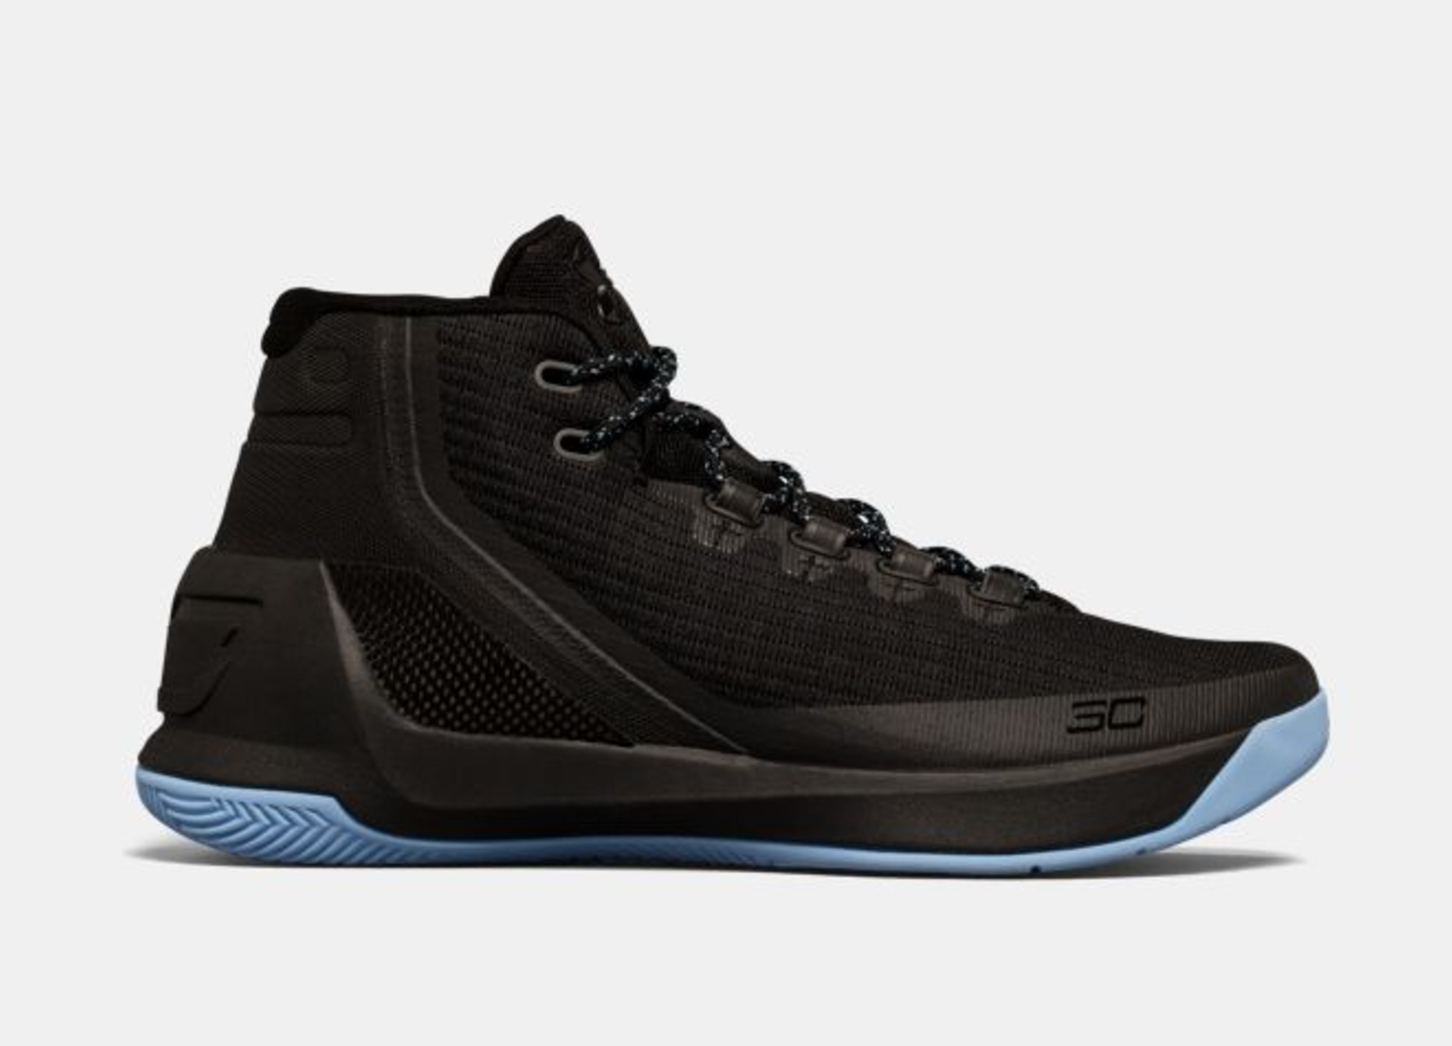 This Weekend's Under Armour Curry 3 